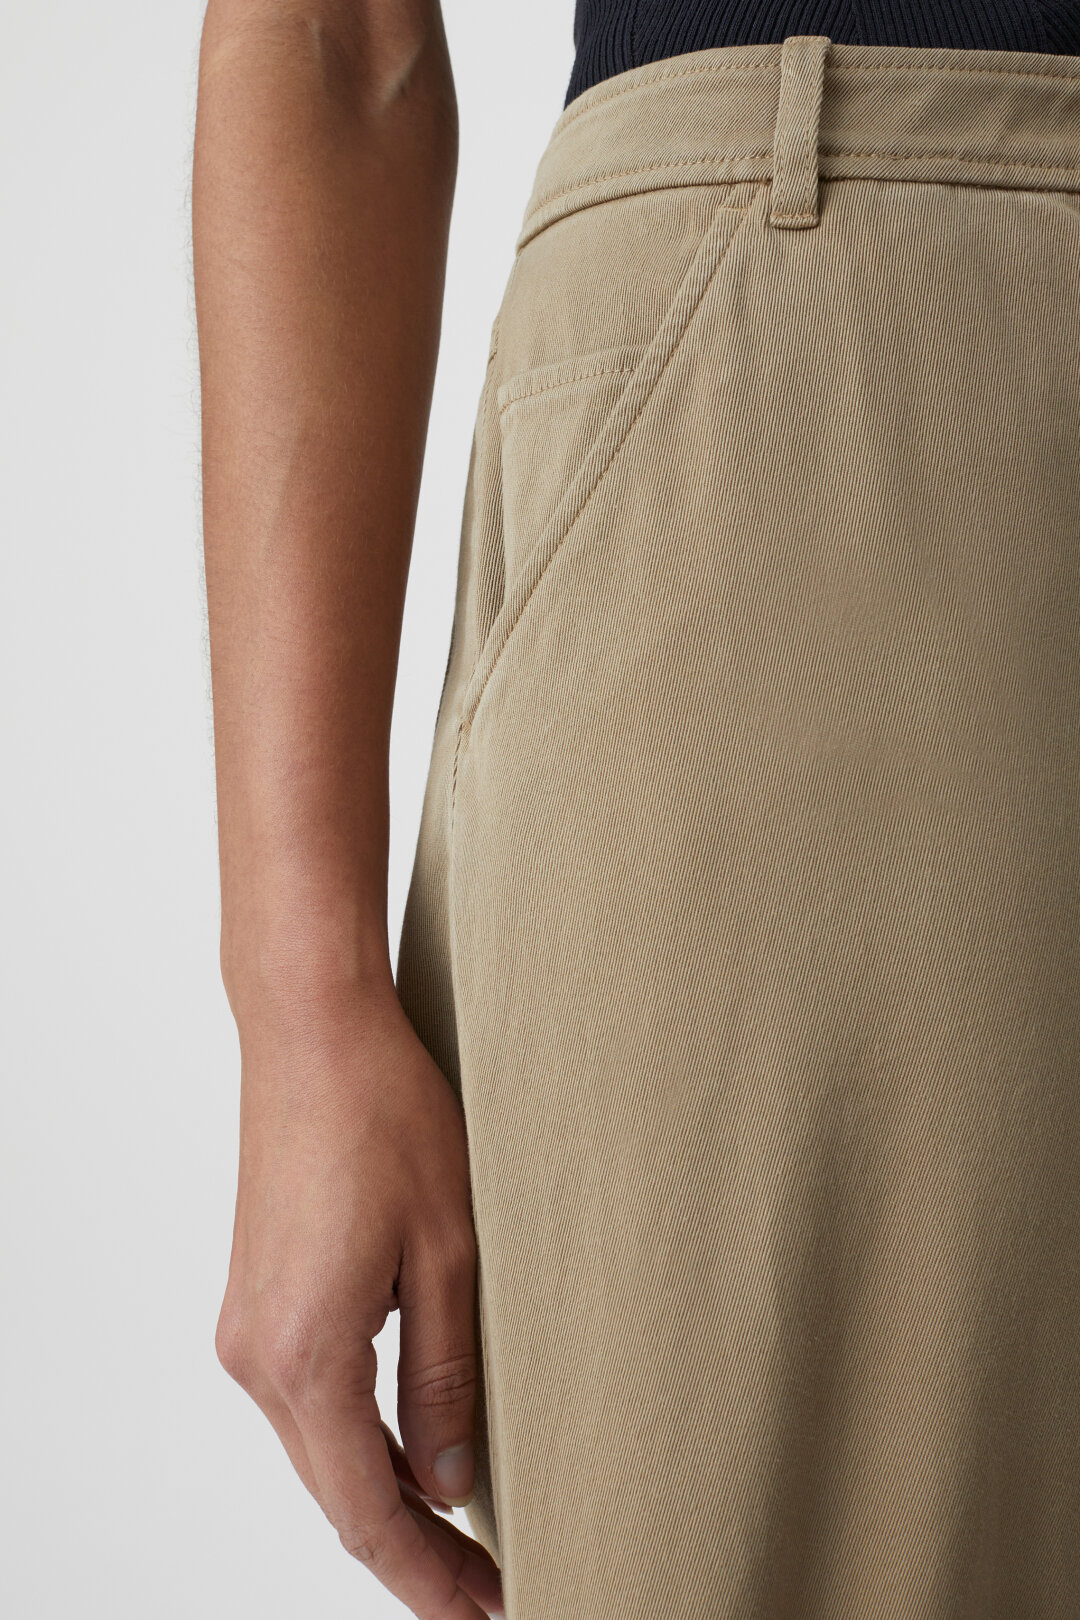 CLOSED Cholet Trouser in Camel